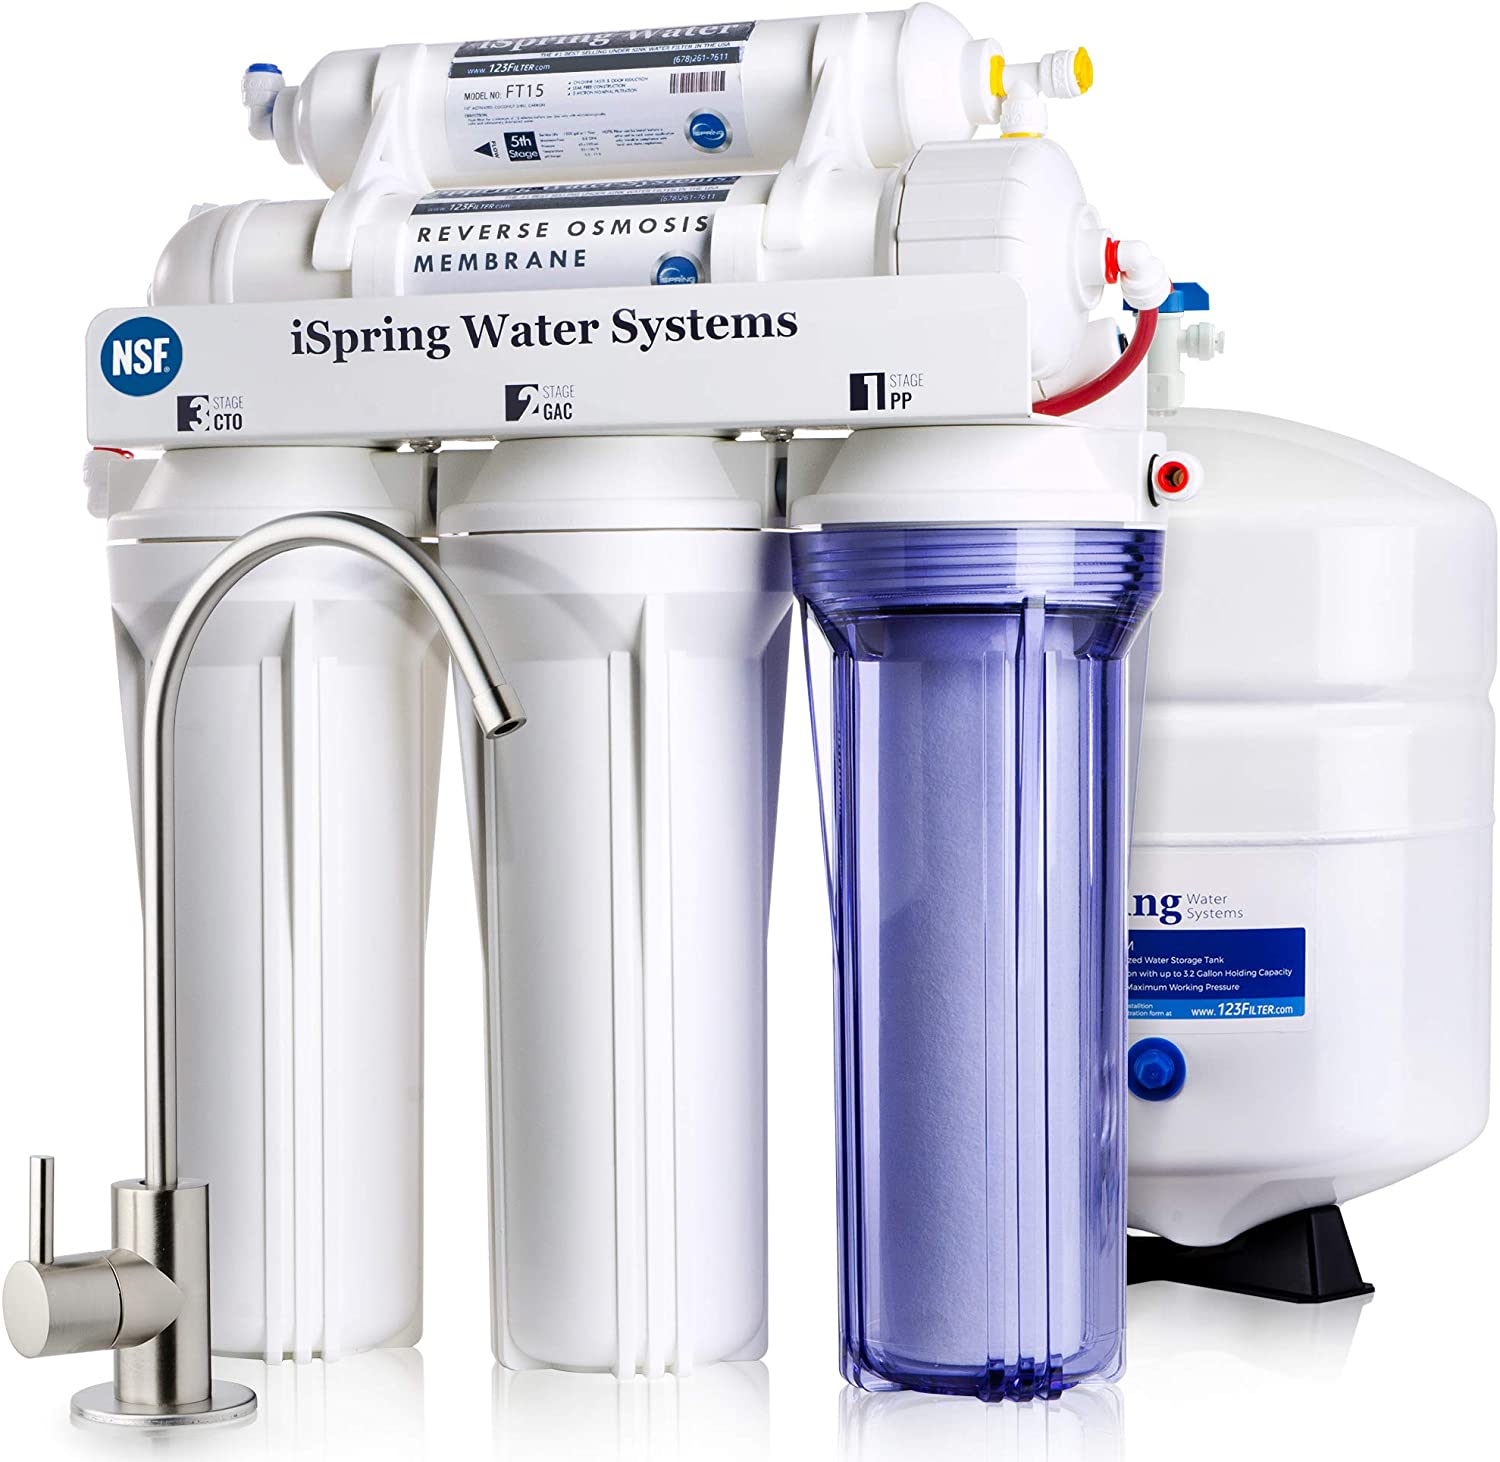 iSpring RCC7 High Capacity Water Softener for Well Water